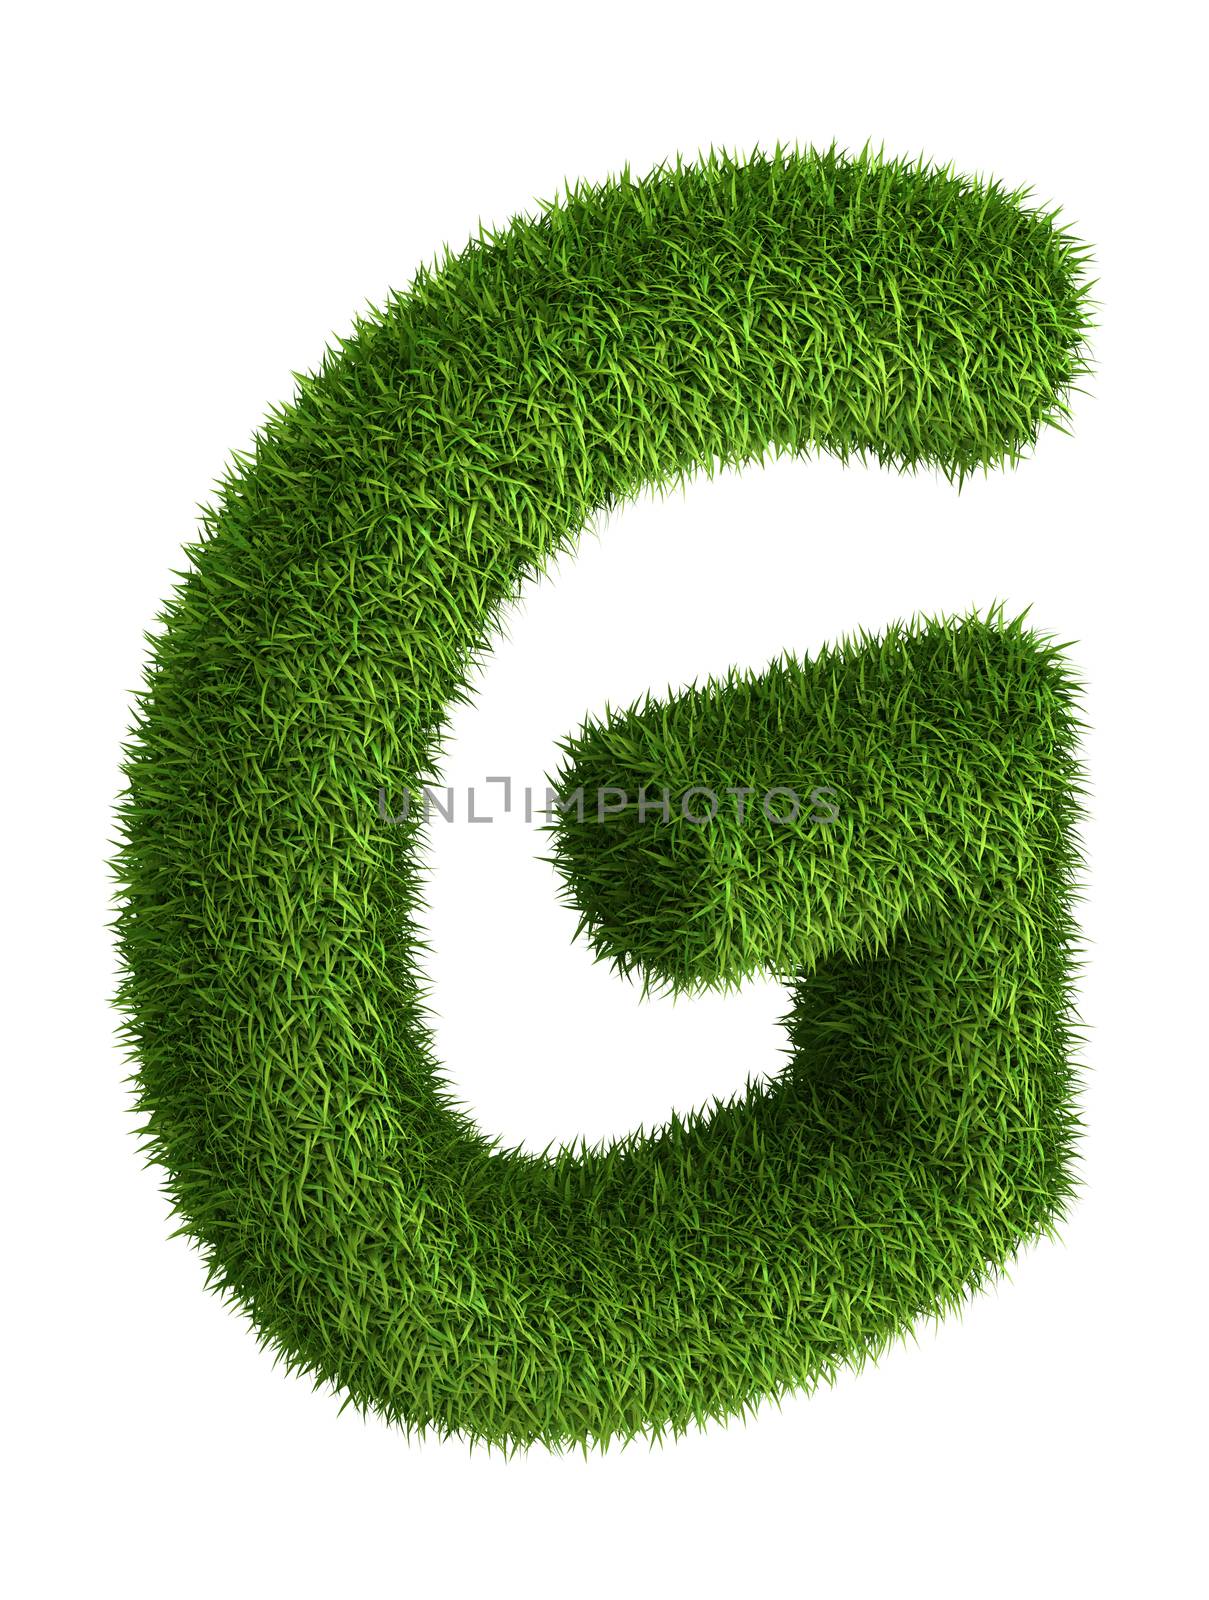 3D Letter G photo realistic isometric projection grass ecology theme on white